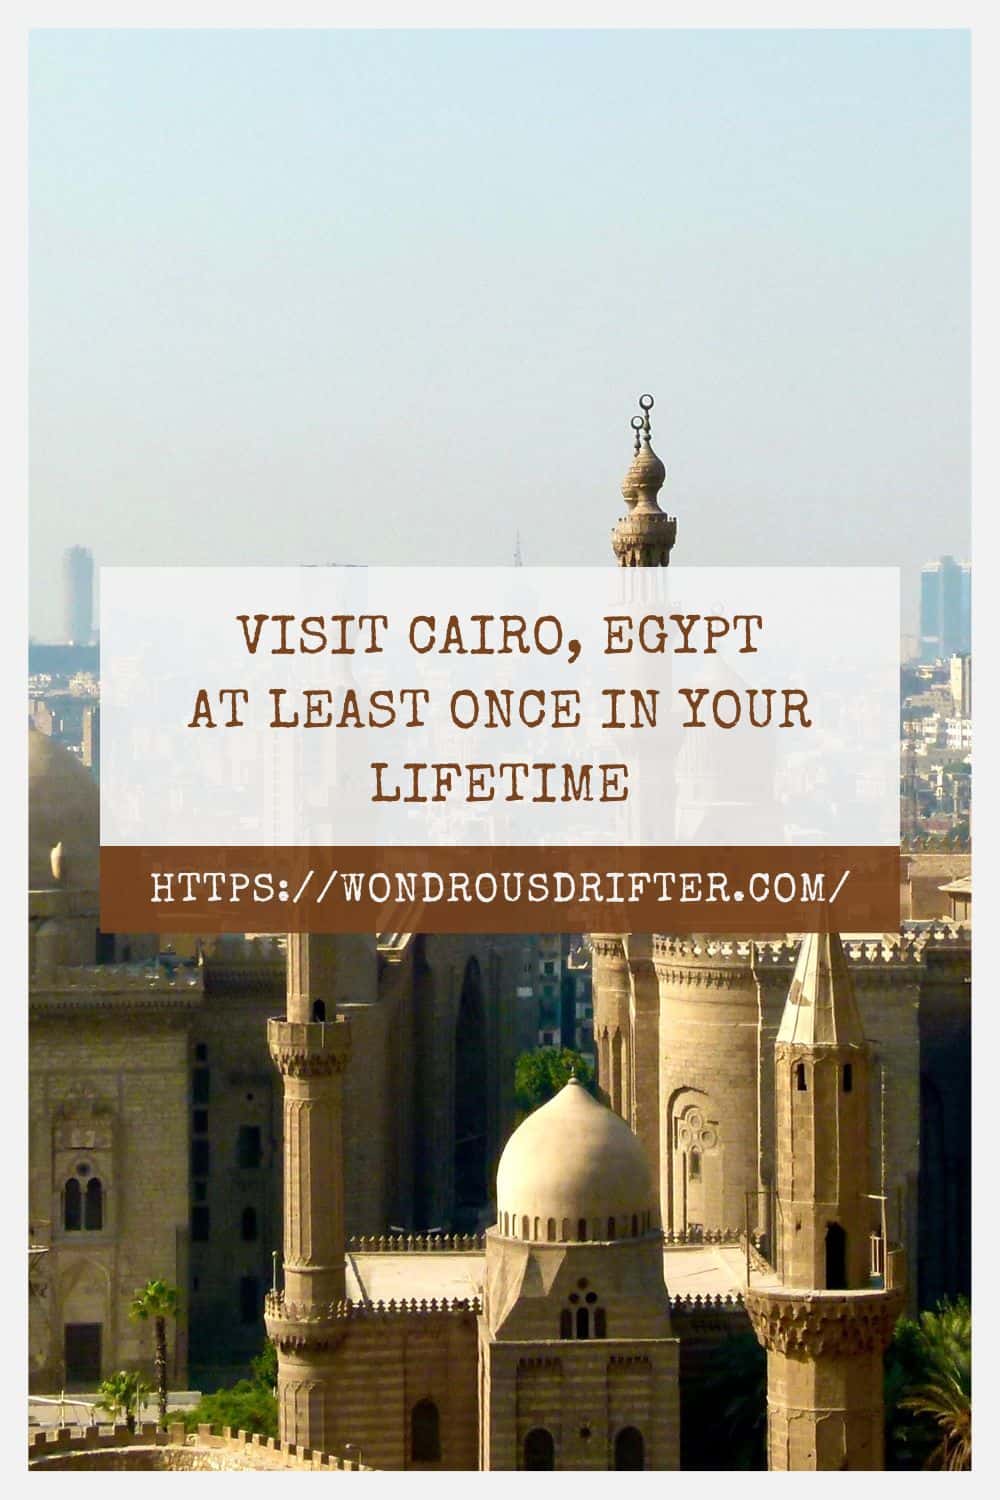 Visit Cairo Egypt at least once in your lifetime